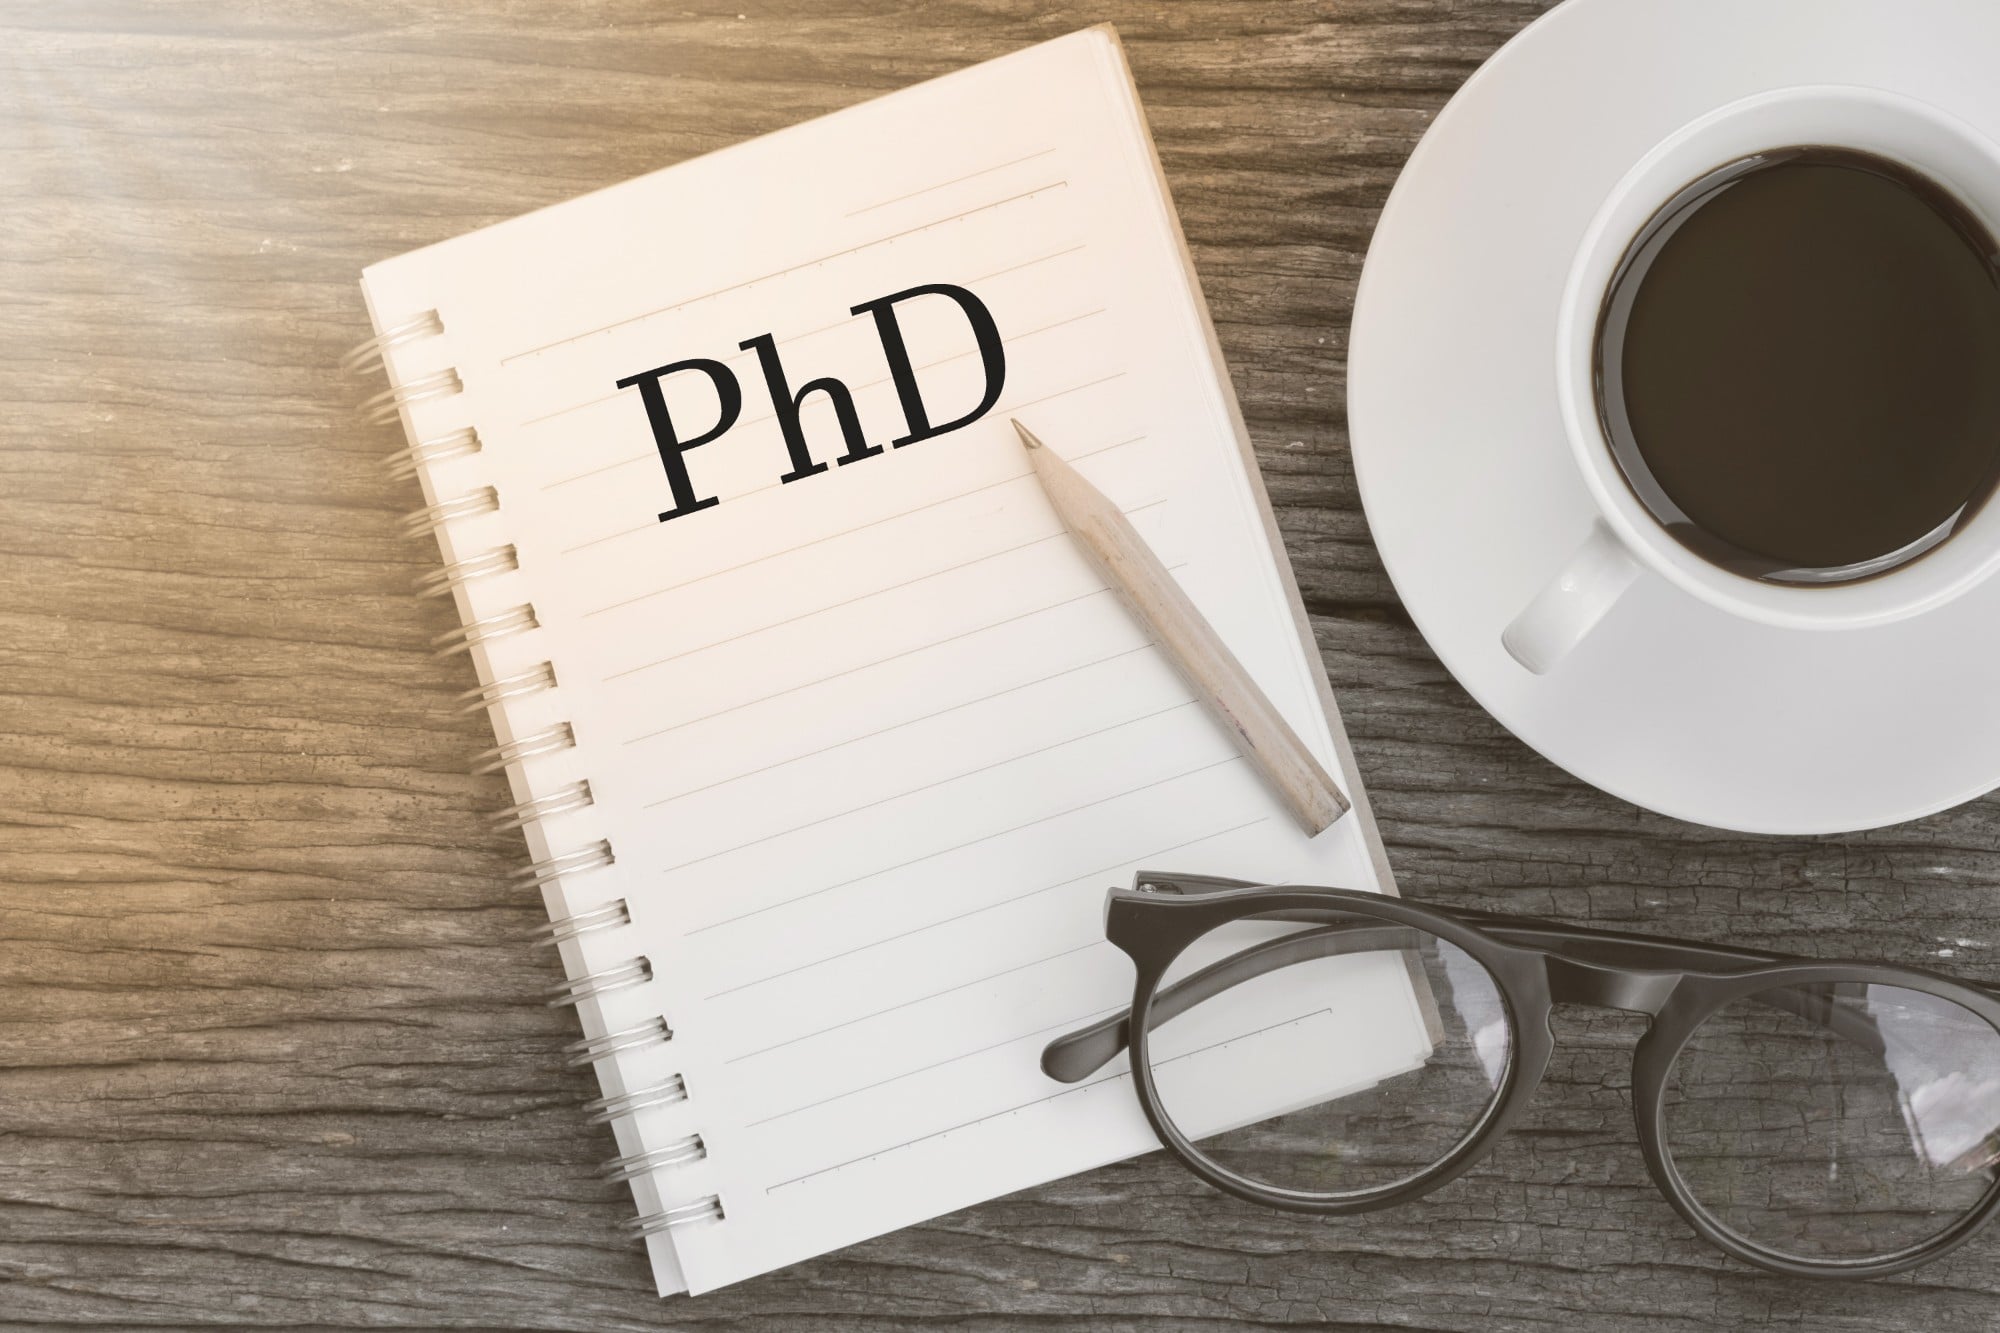 phd candidate cosa significa